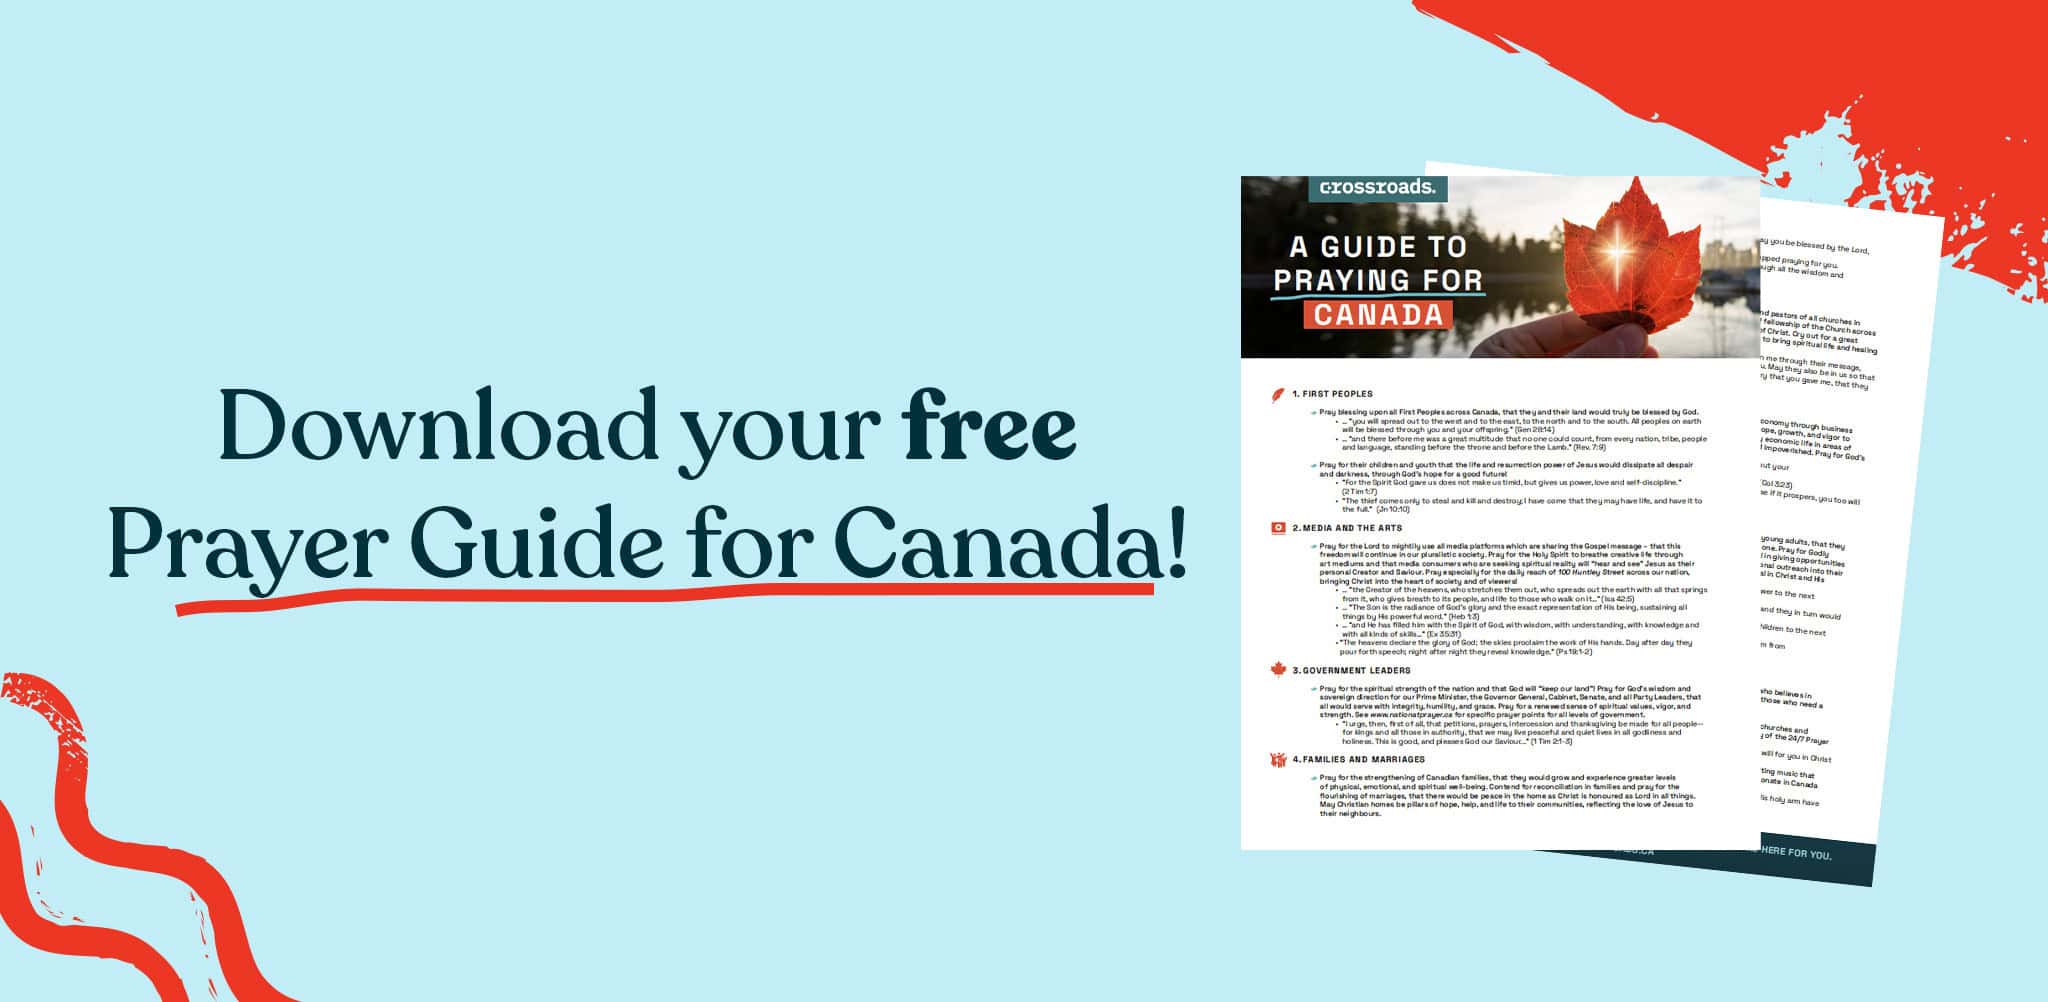 Download the Prayer Guide for Canada